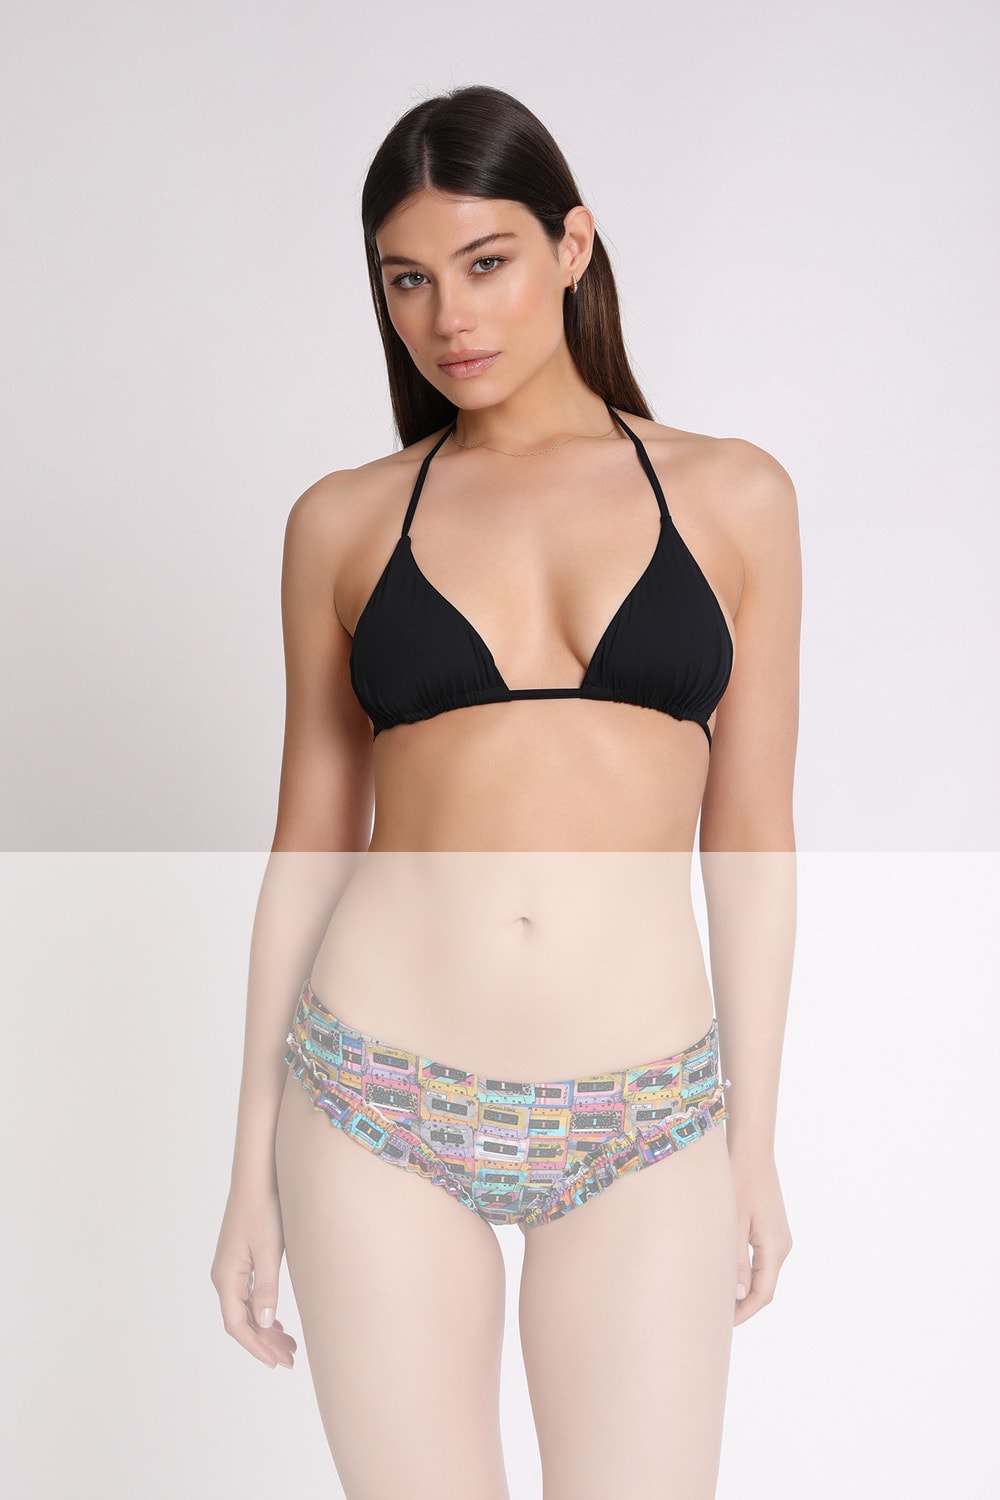 Marion Zimet Sliding Triangle Bikini Top In Microfiber, With Removable Cup Inserts